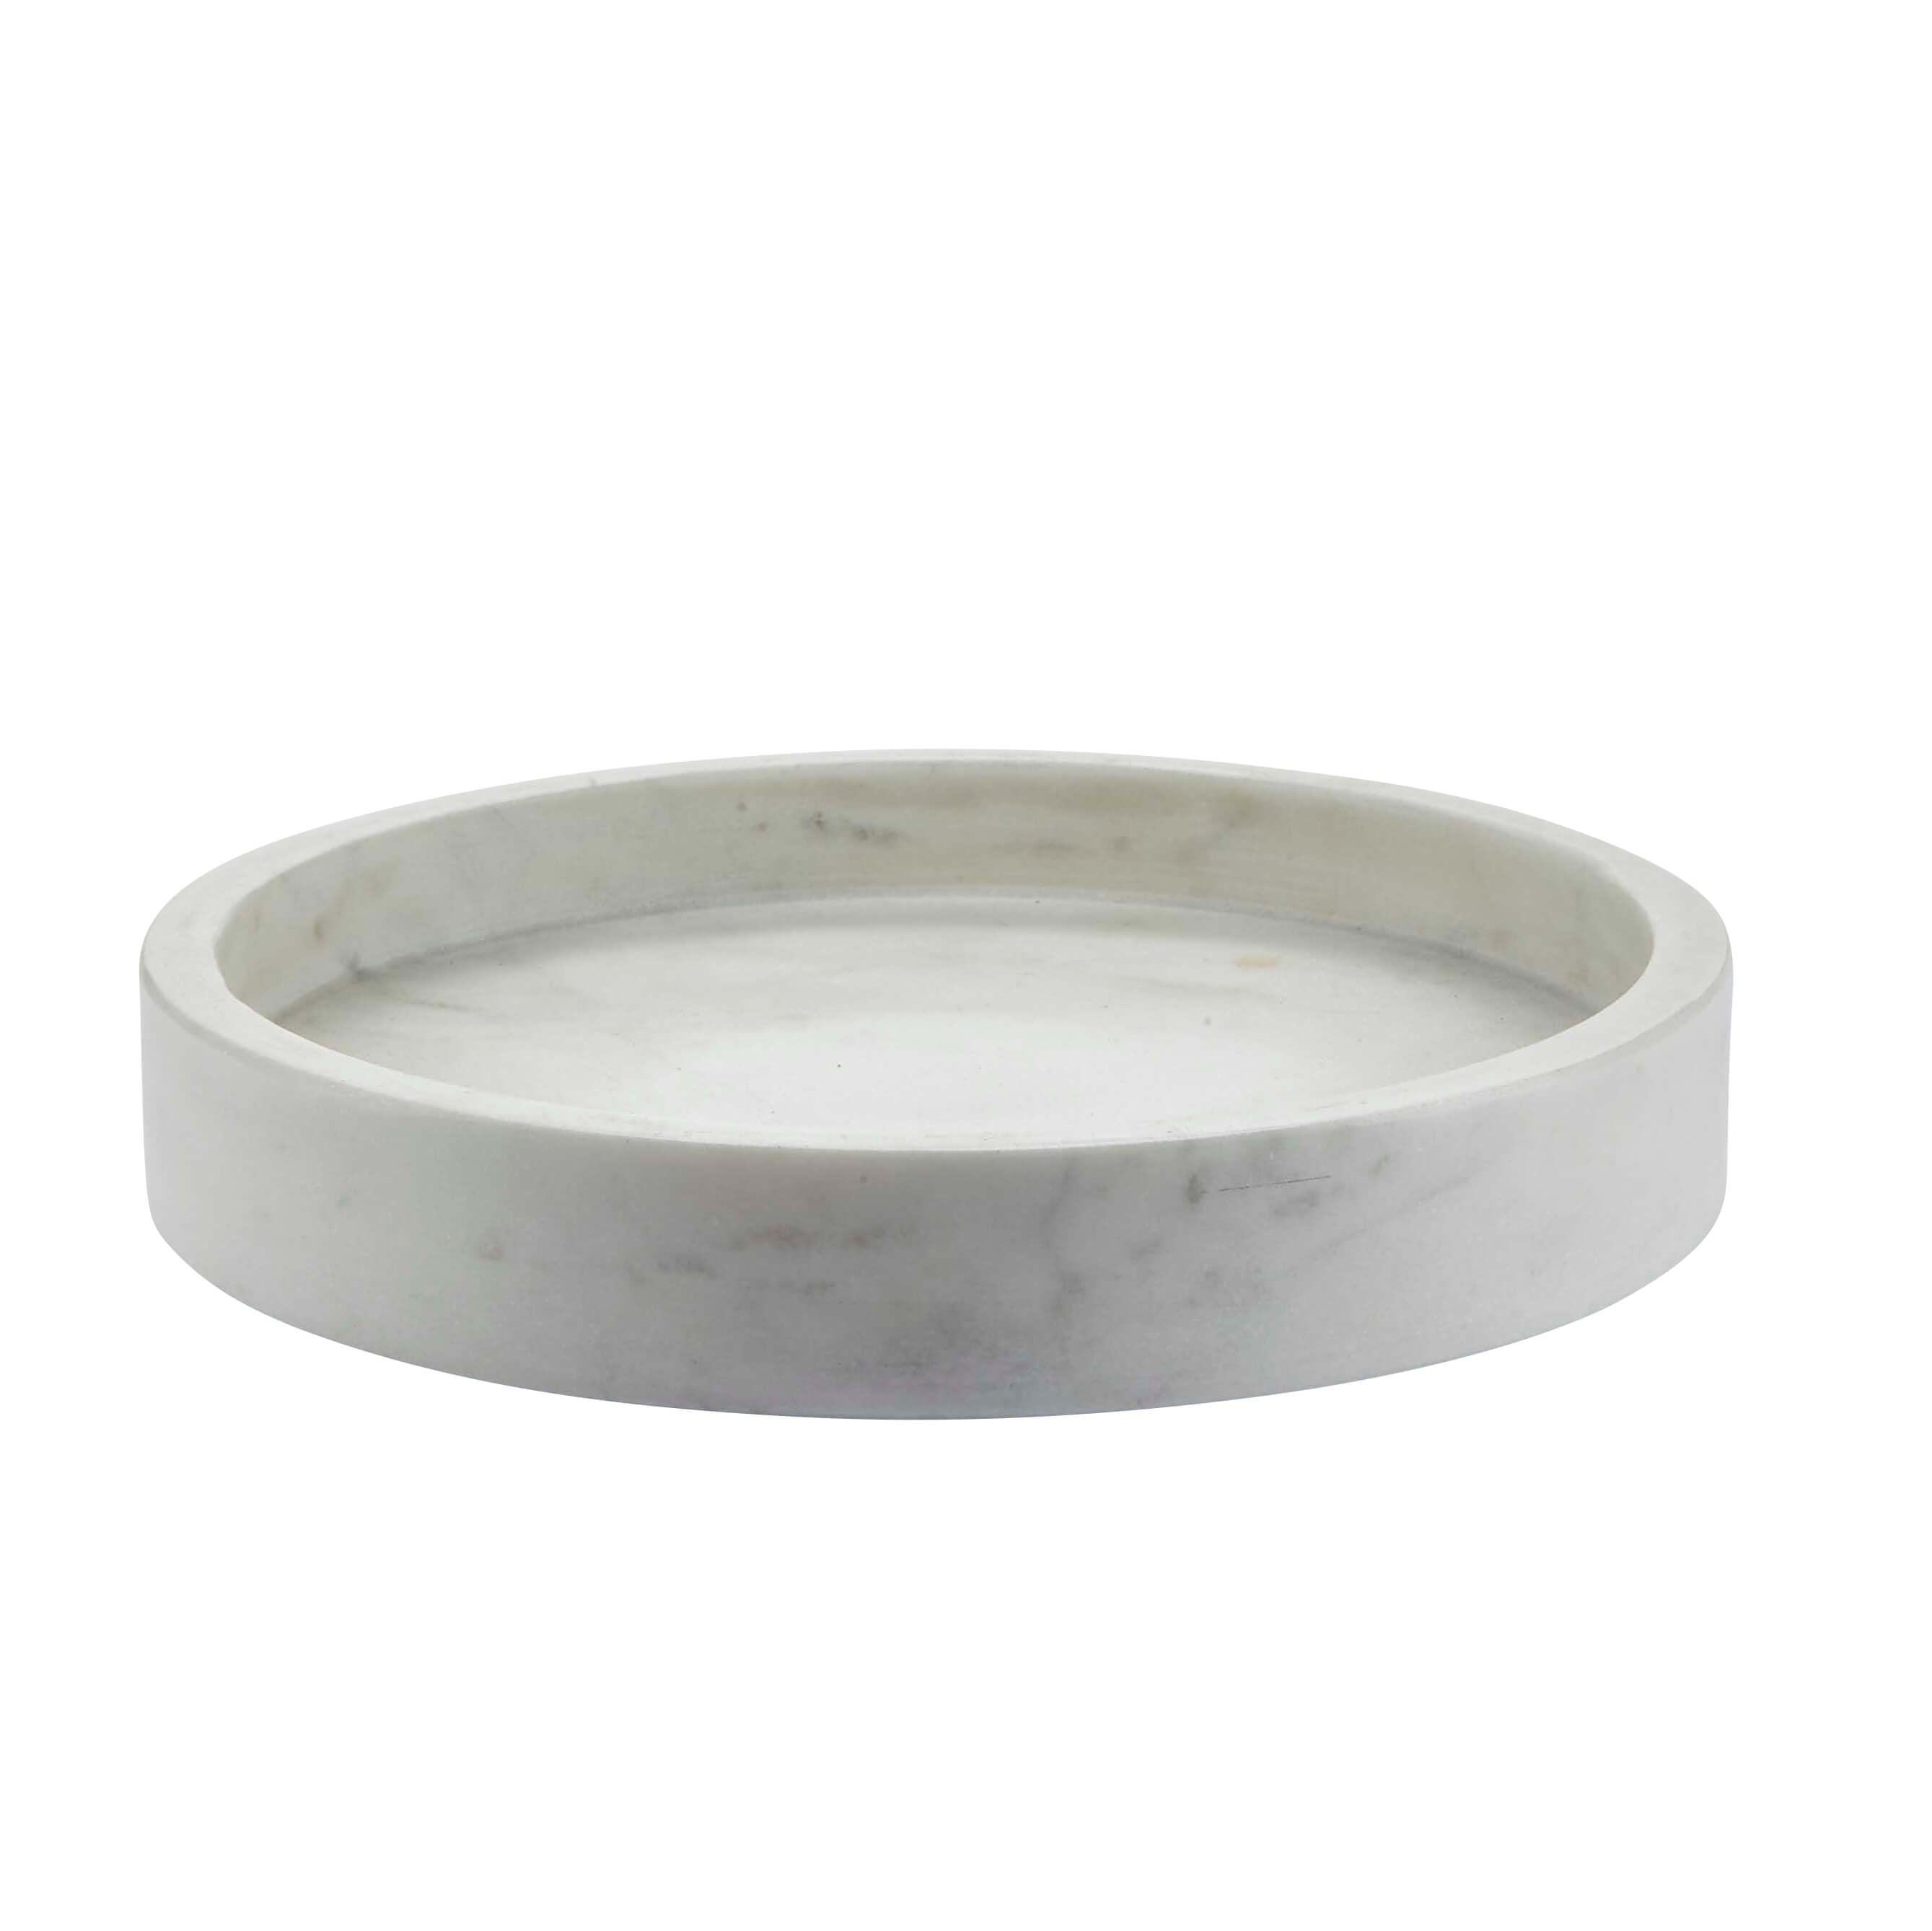 Bahne White Marble Round Tray